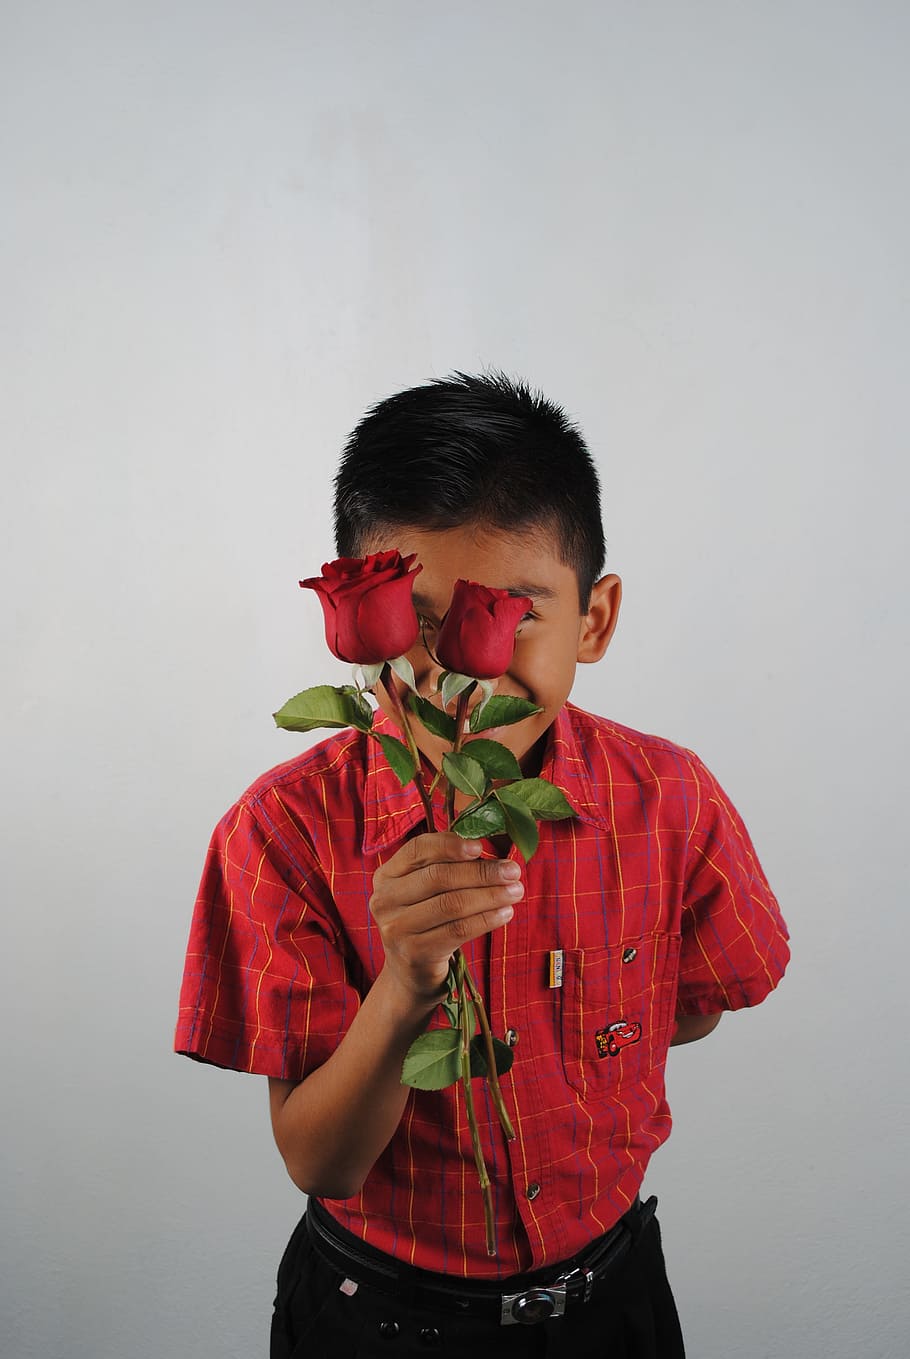 red roses, red, child, one person, boys, front view, childhood, standing, indoors, casual clothing